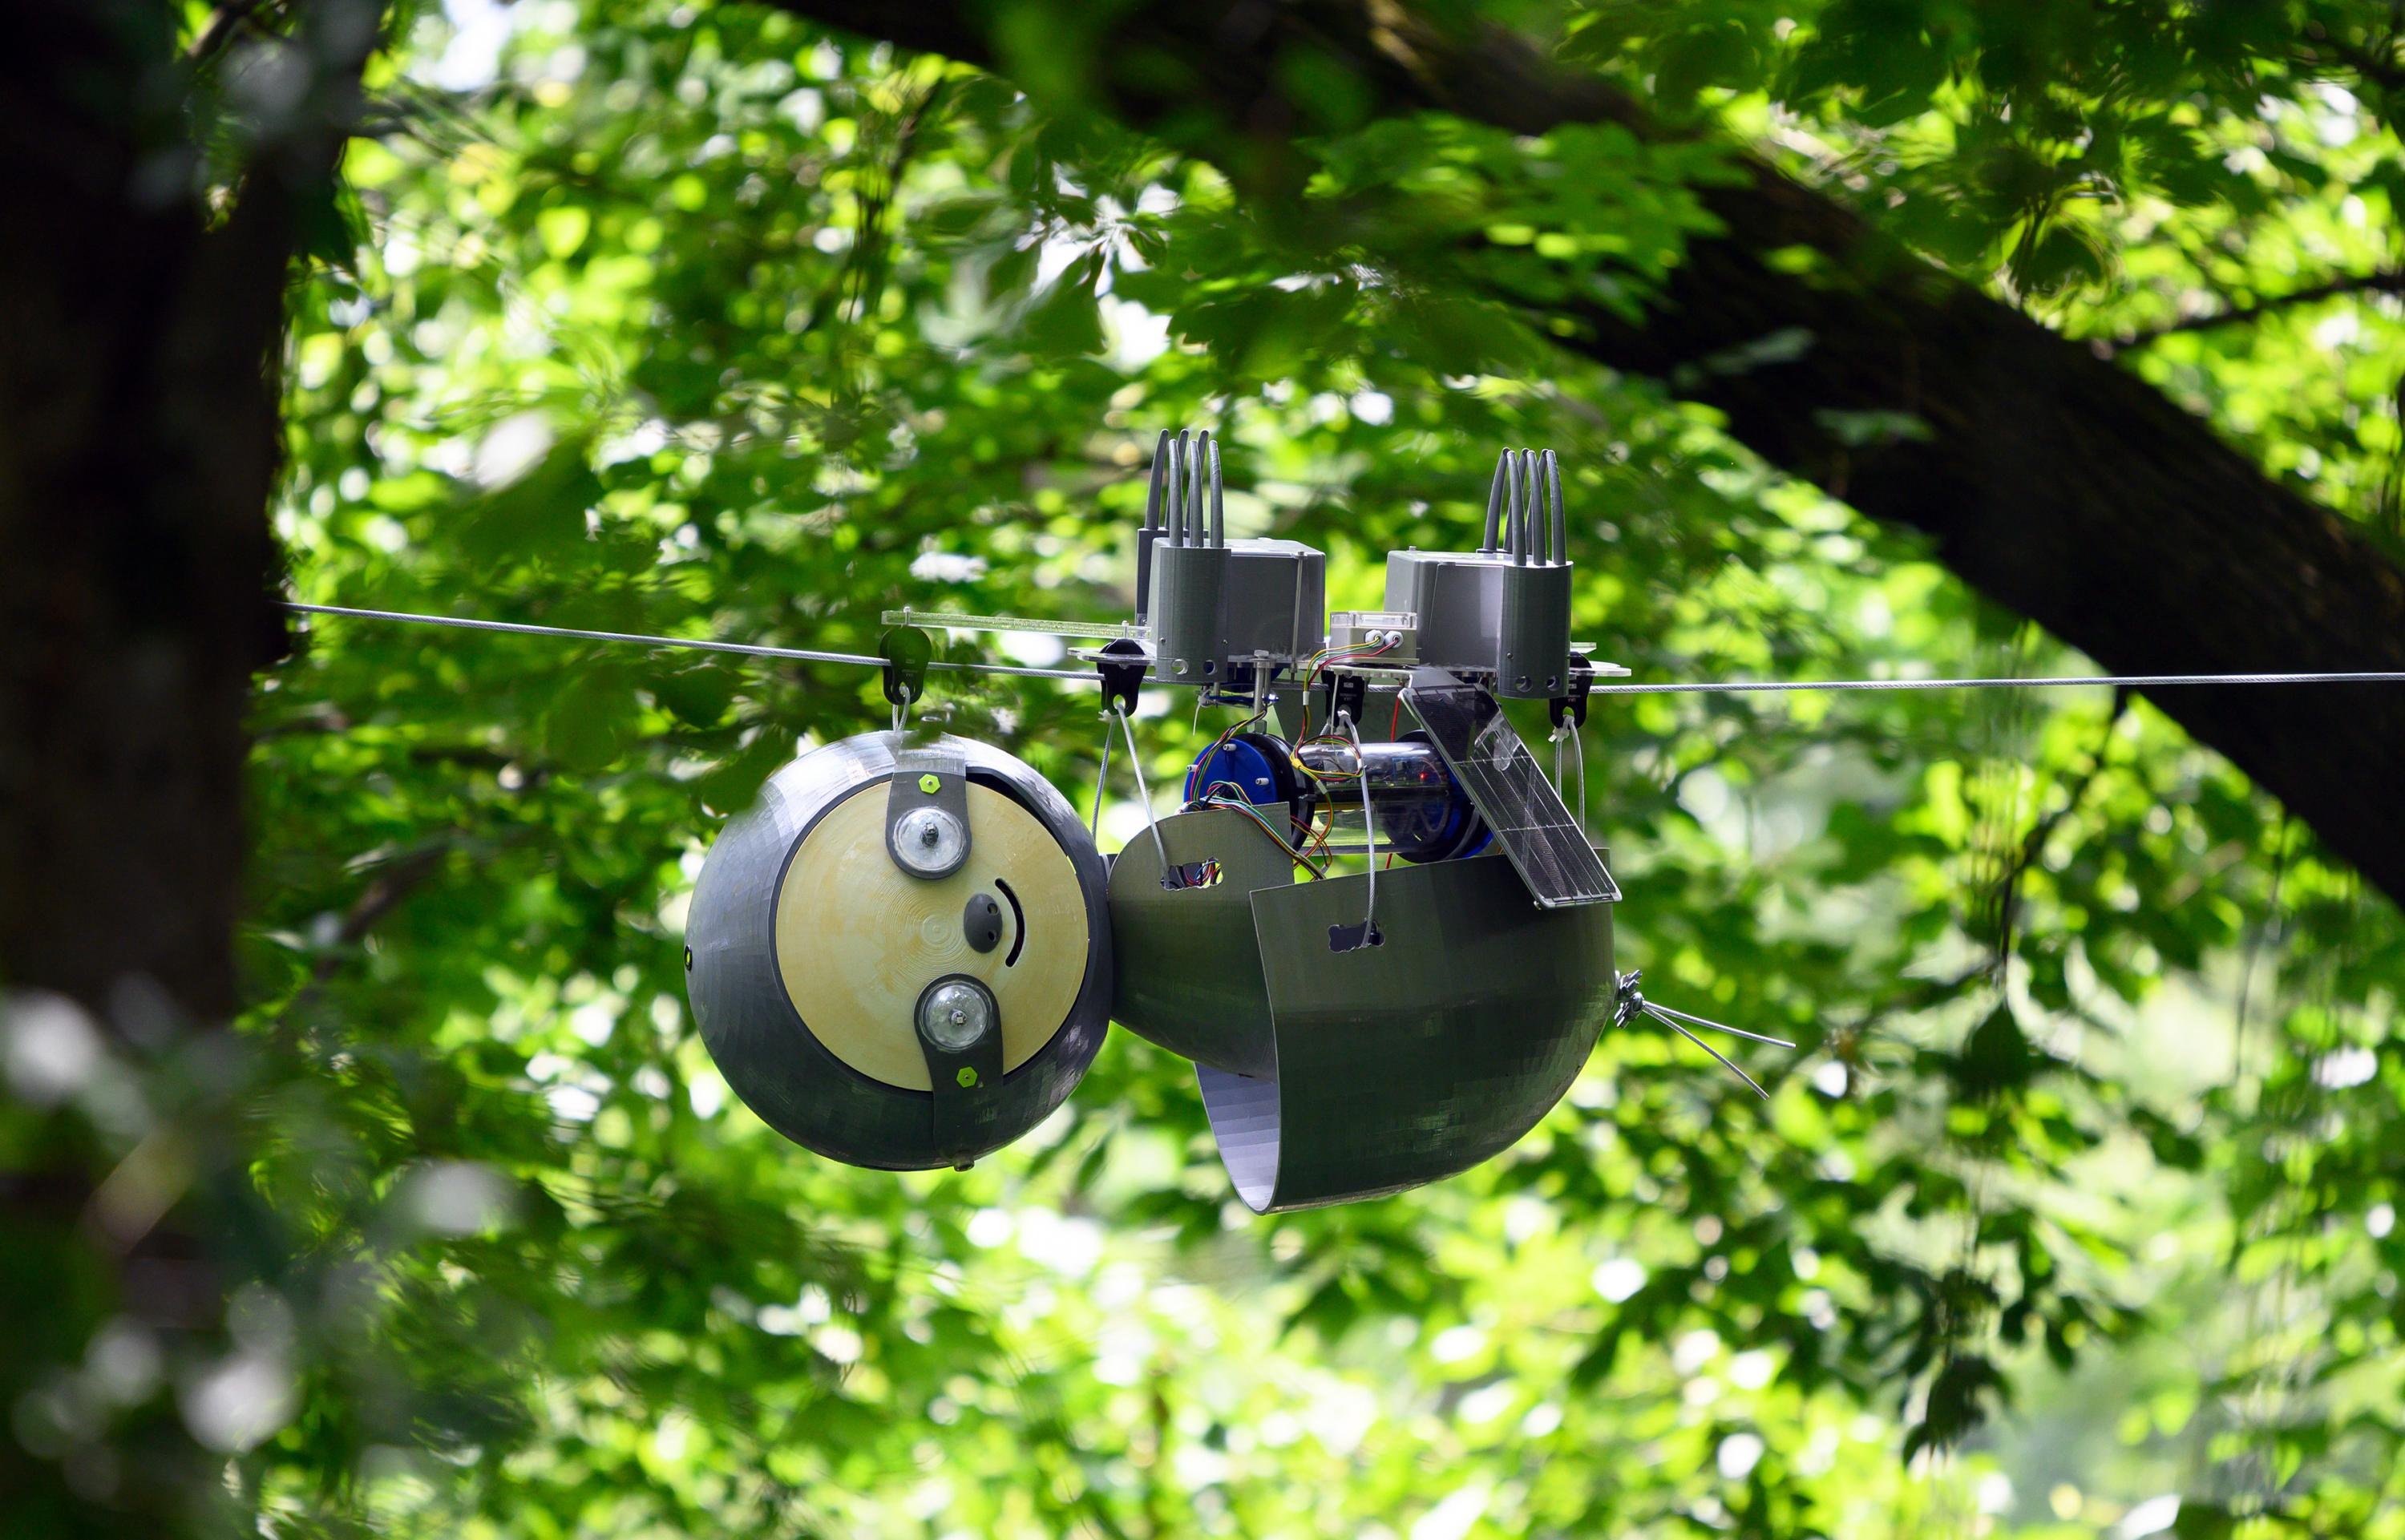 SlothBot is a slow-moving and energy-efficient robot that can linger in the trees to monitor animals, plants, and the environment below. It has been installed for testing in the Atlanta Botanical Garden. (Credit: Rob Felt, Georgia Tech)